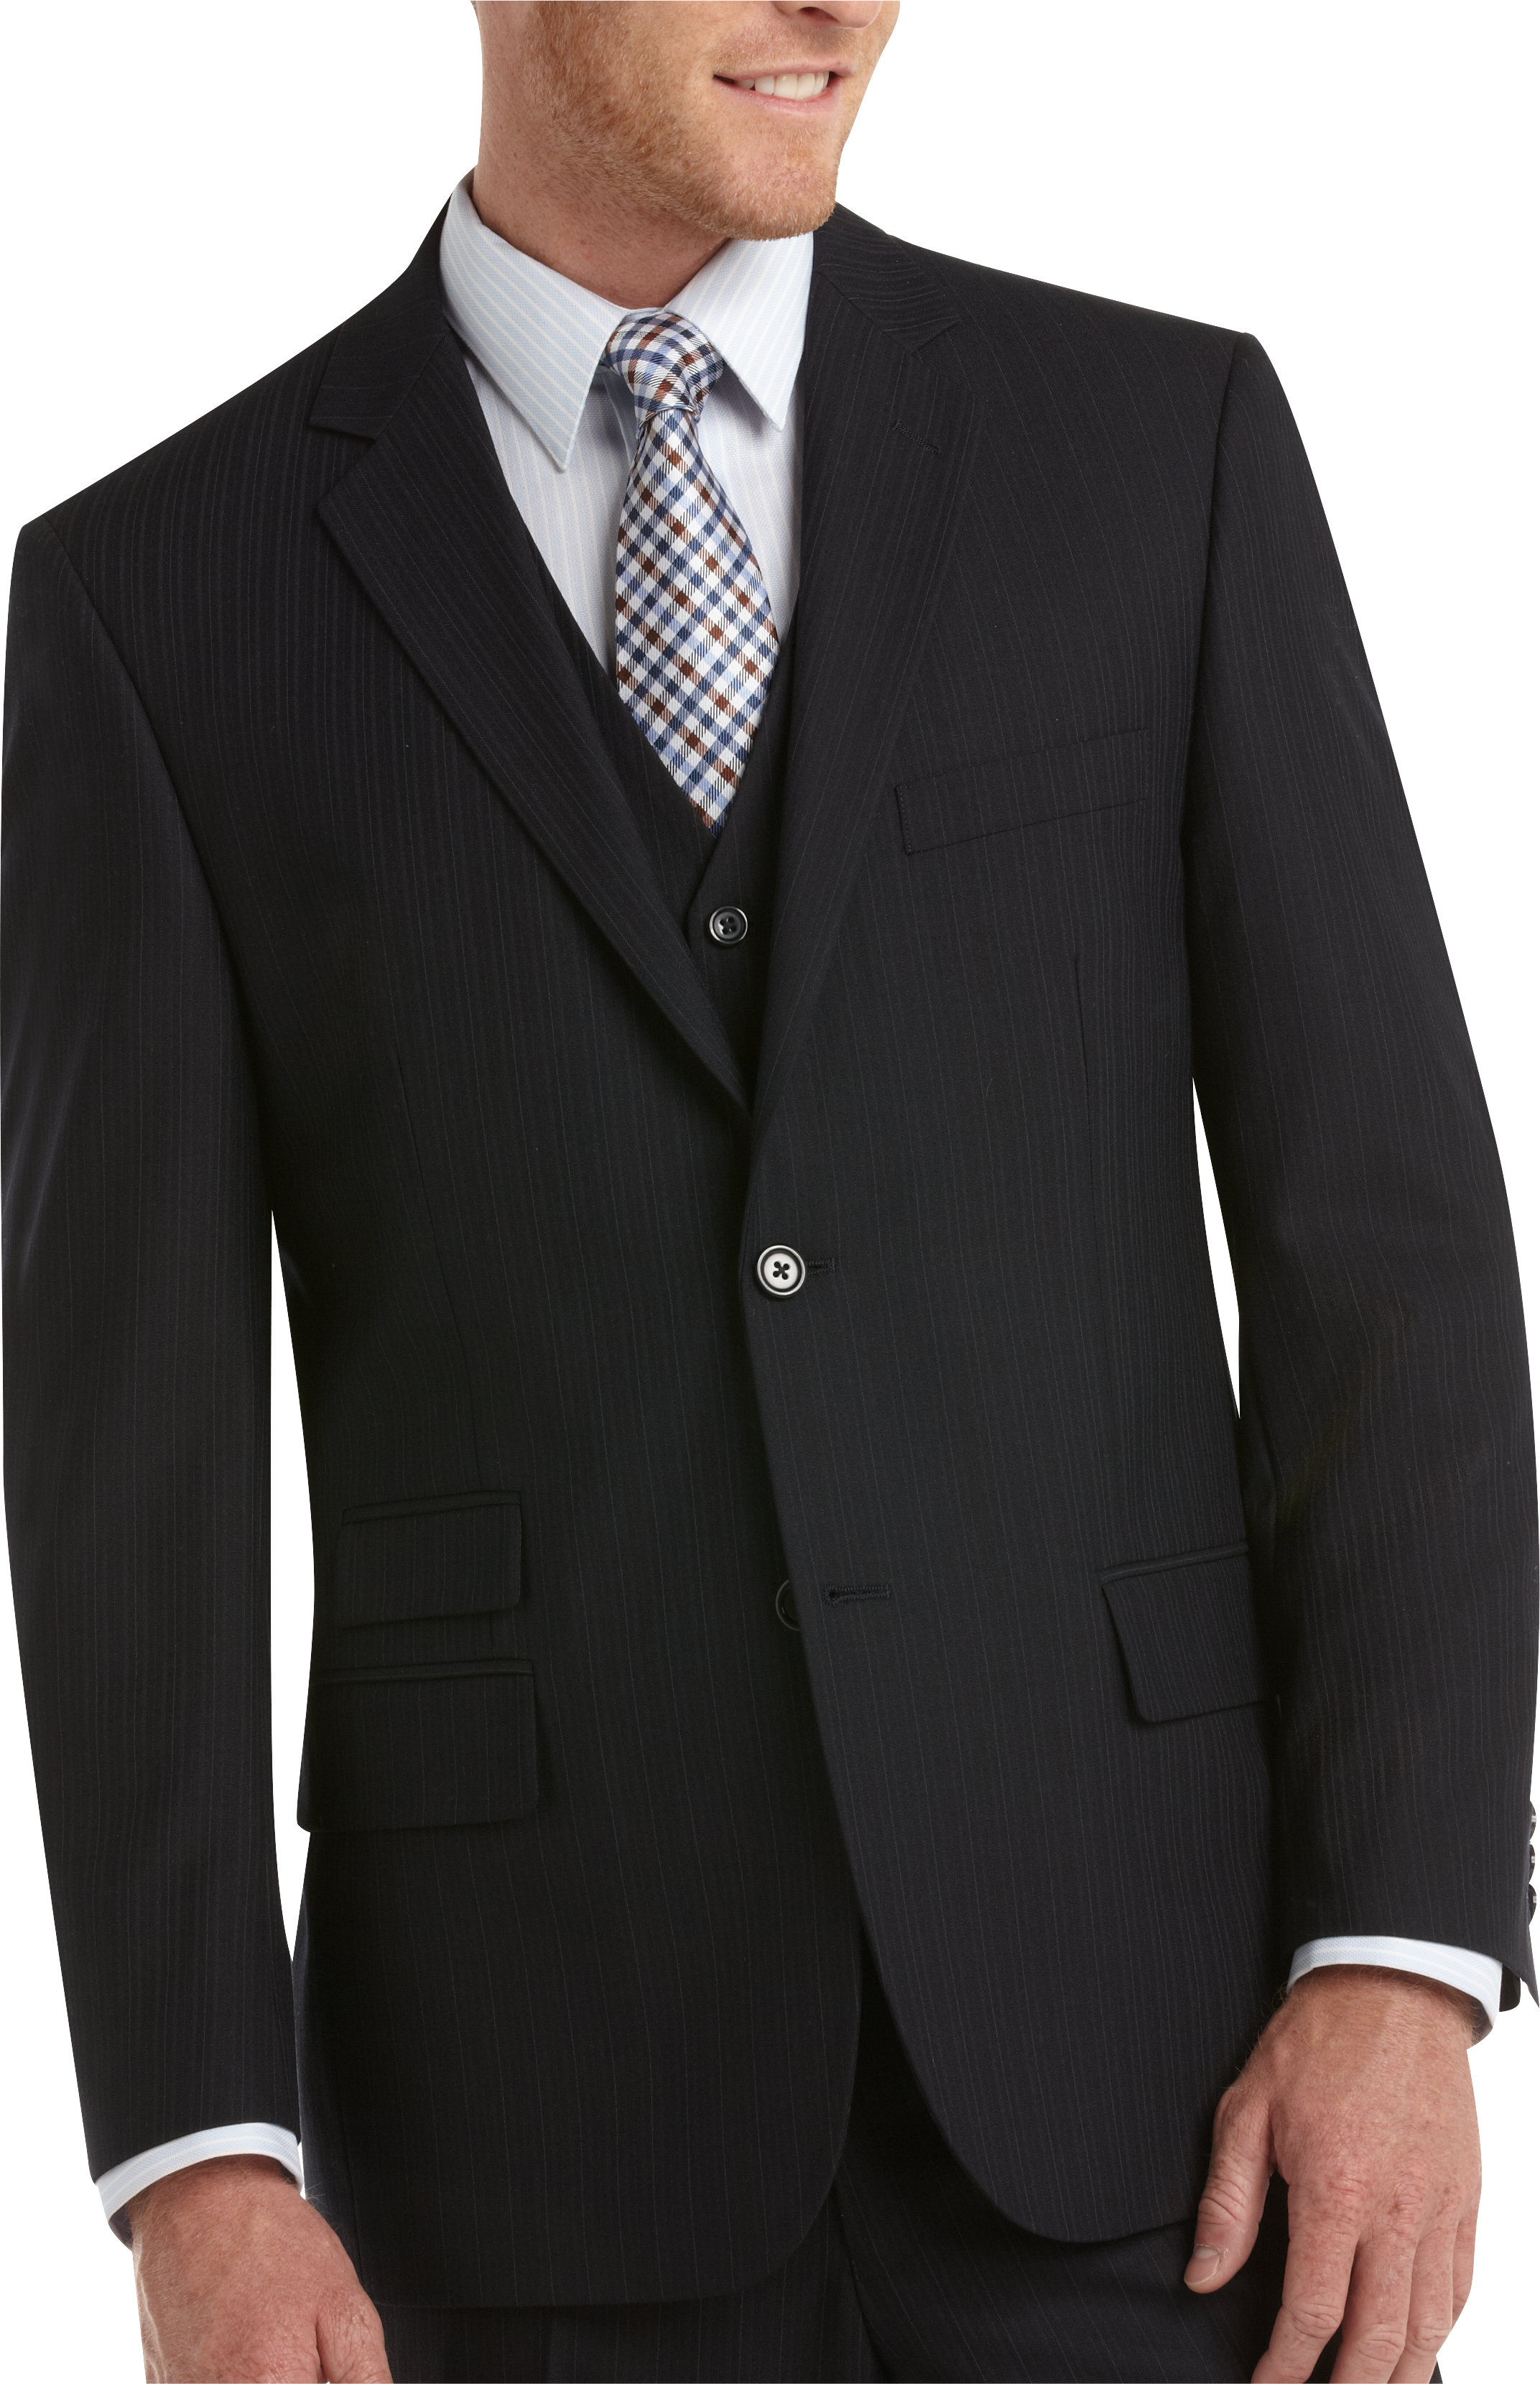 Big & Tall Men's Vested Suits, Suits with Vests | Men's Wearhouse